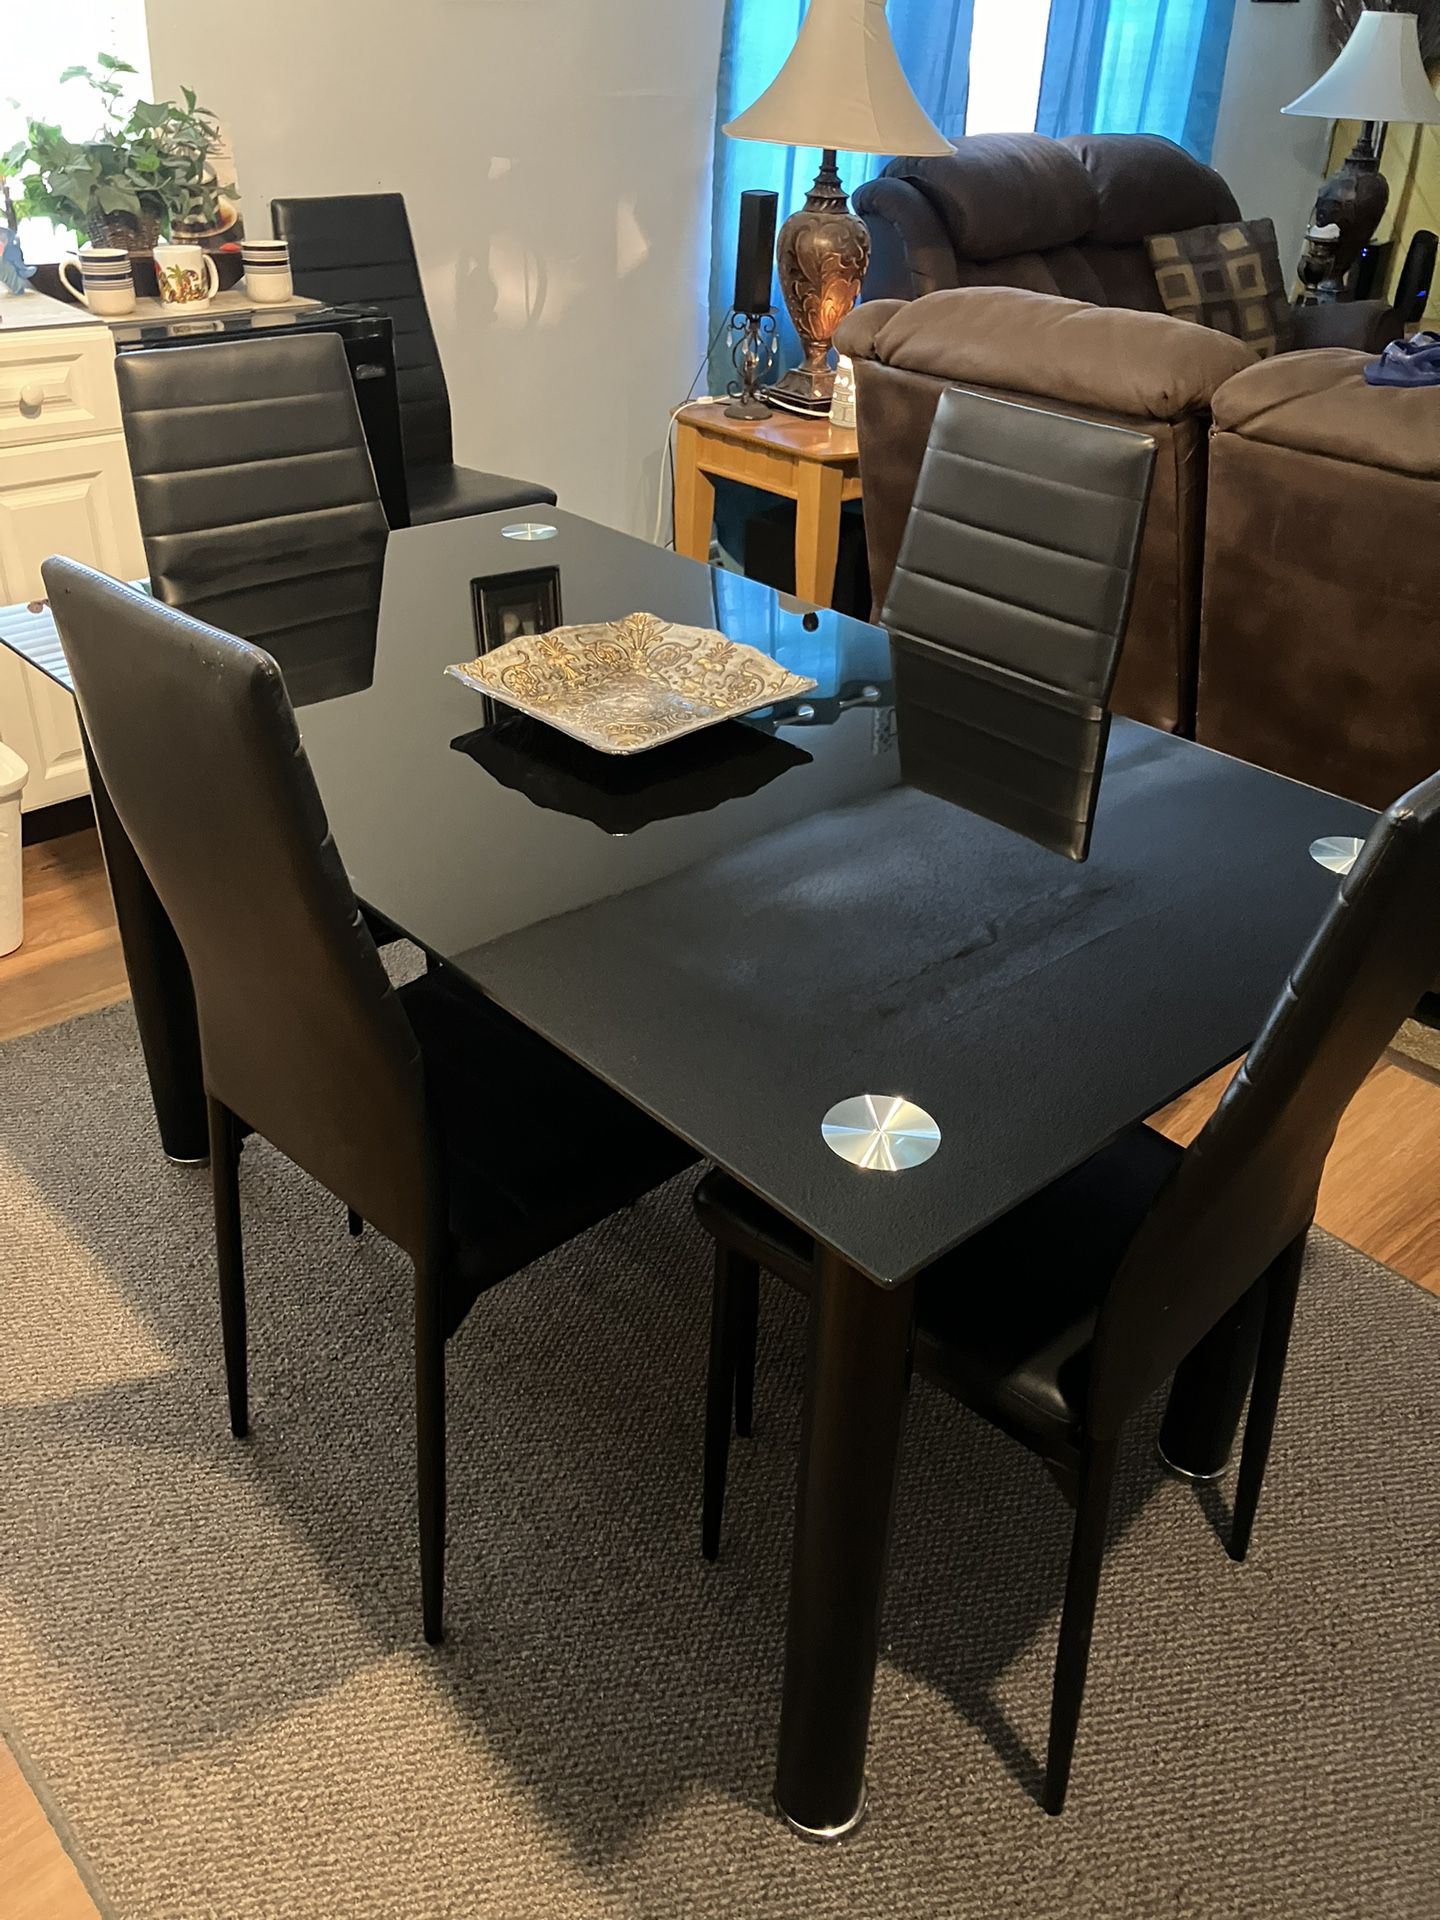 Black Glass Dining Room Table With 6 Chairs 